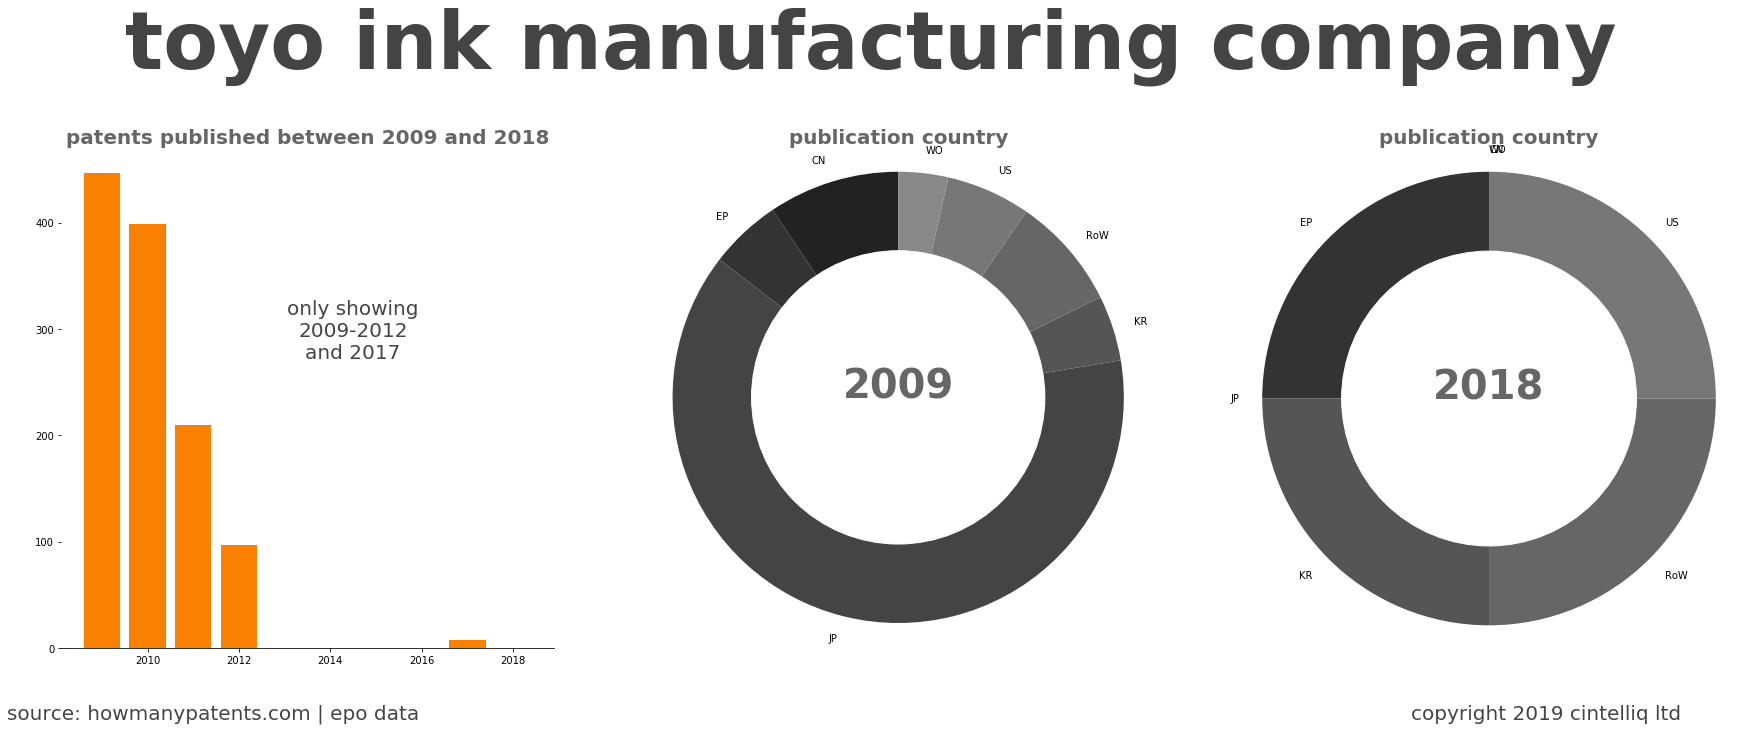 summary of patents for Toyo Ink Manufacturing Company